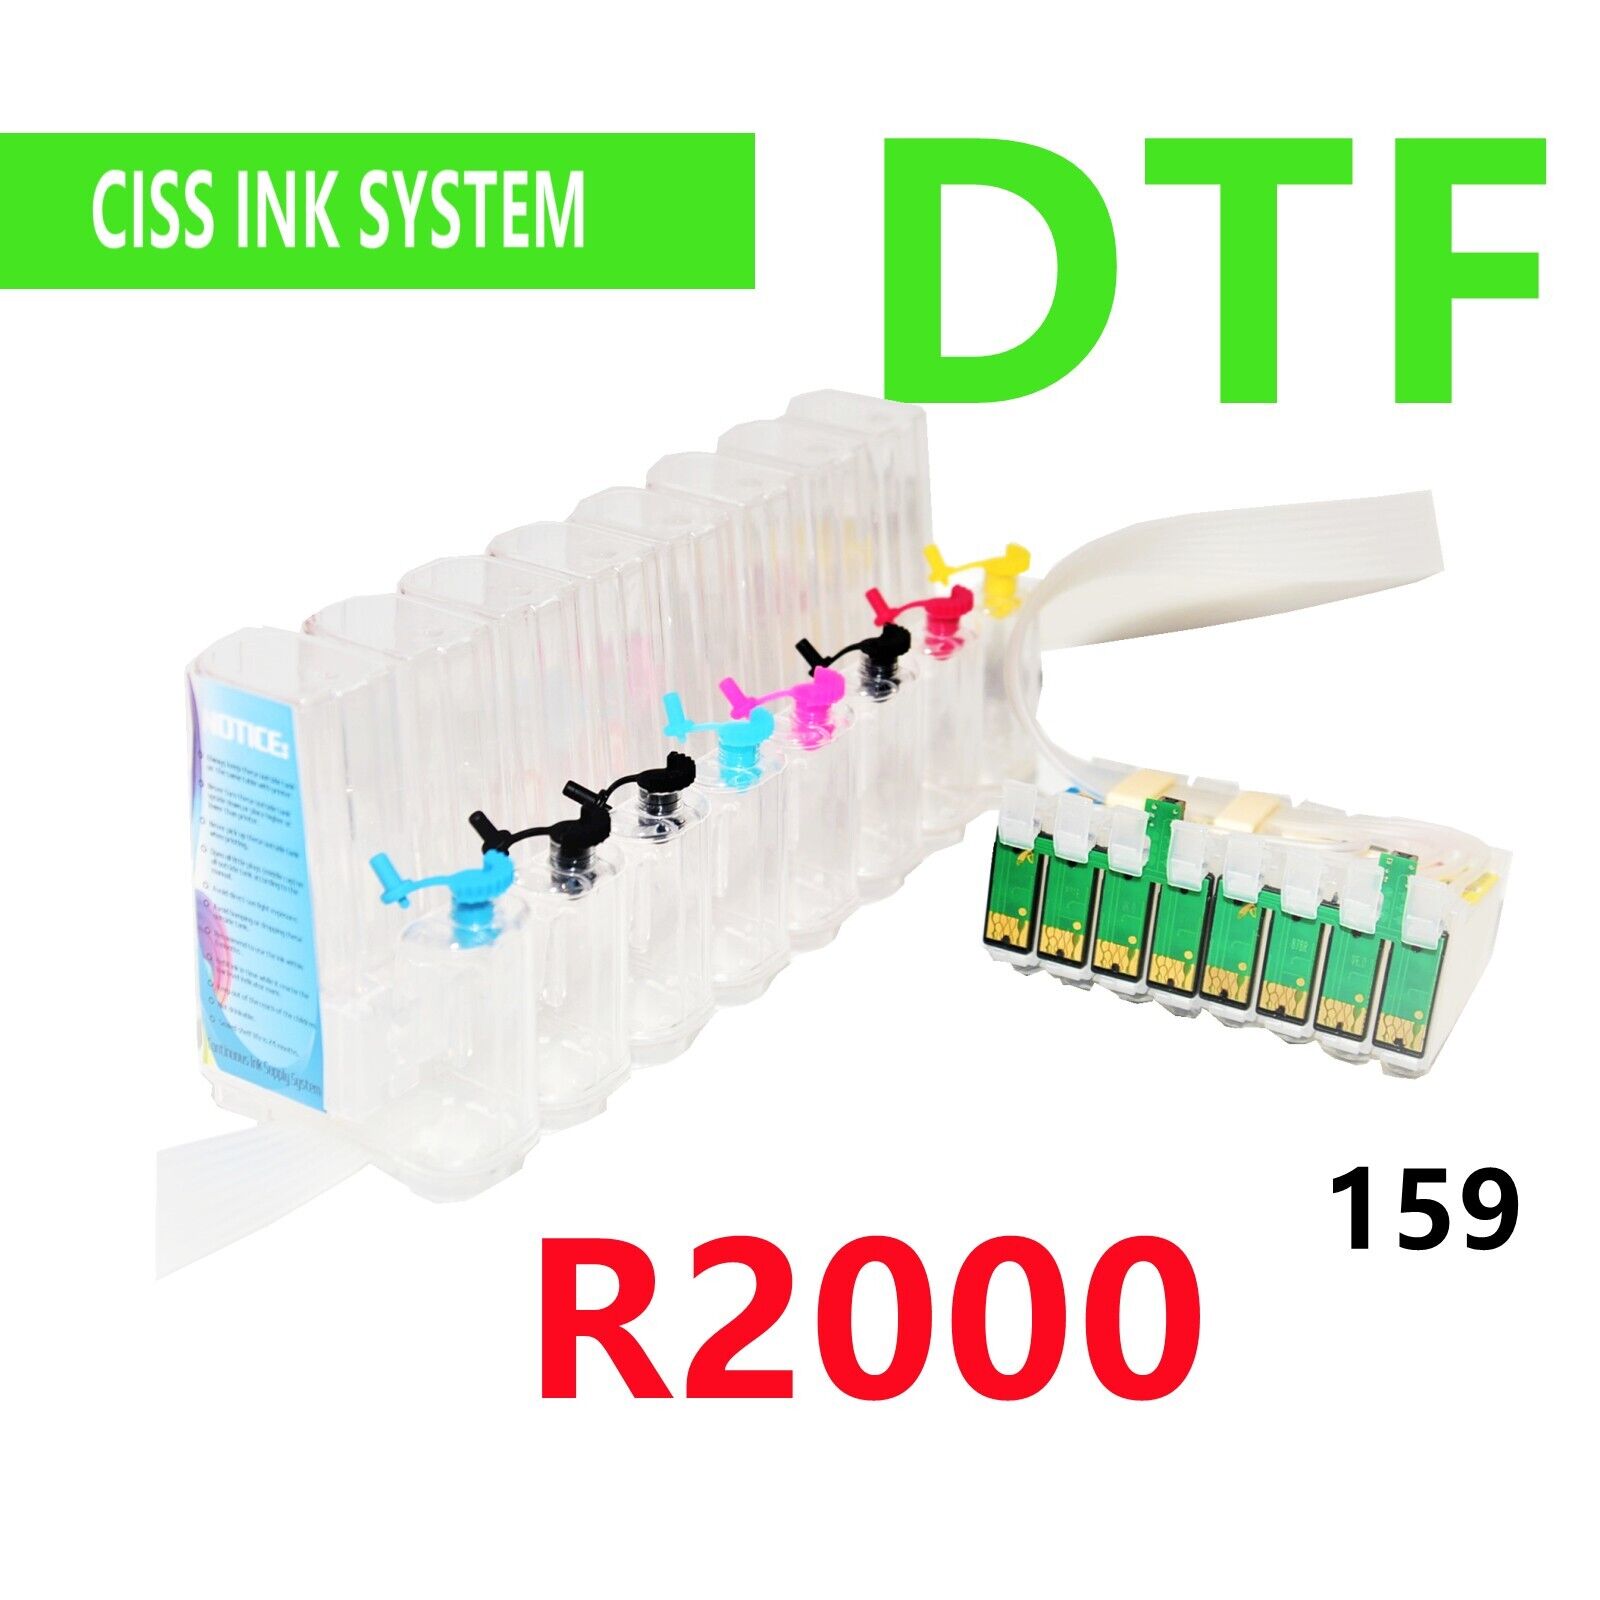 Refillable Empty Cis ciss ink system for R2000 Printer DTF Printing ARC